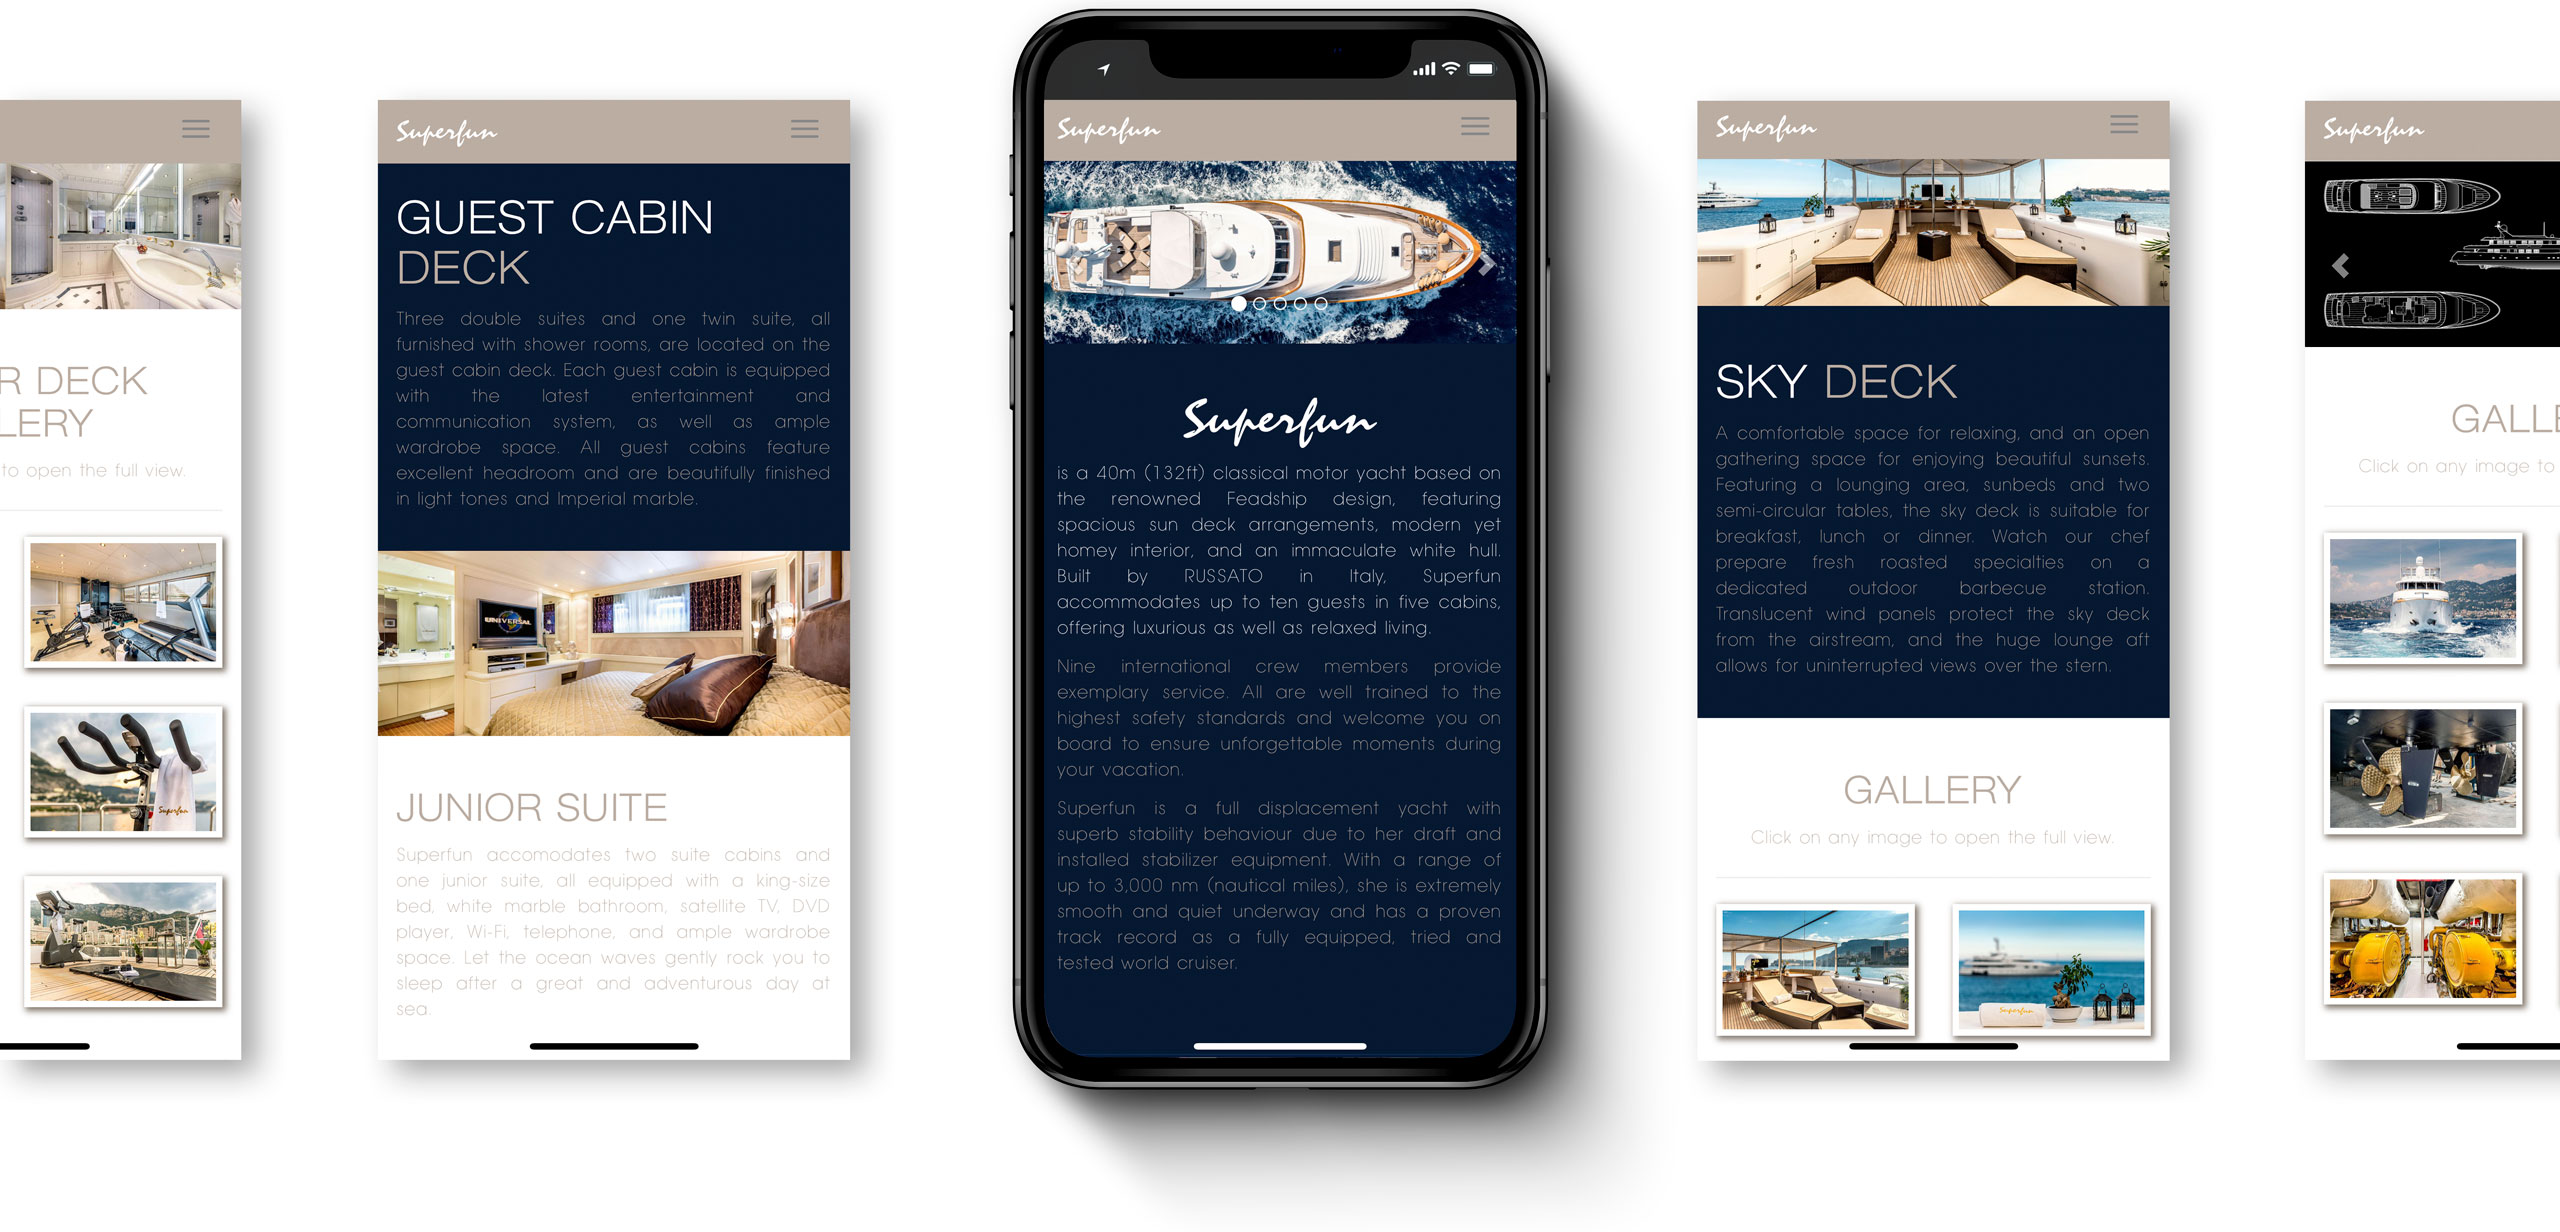 Web design for mobile devices of Superfun super yacht